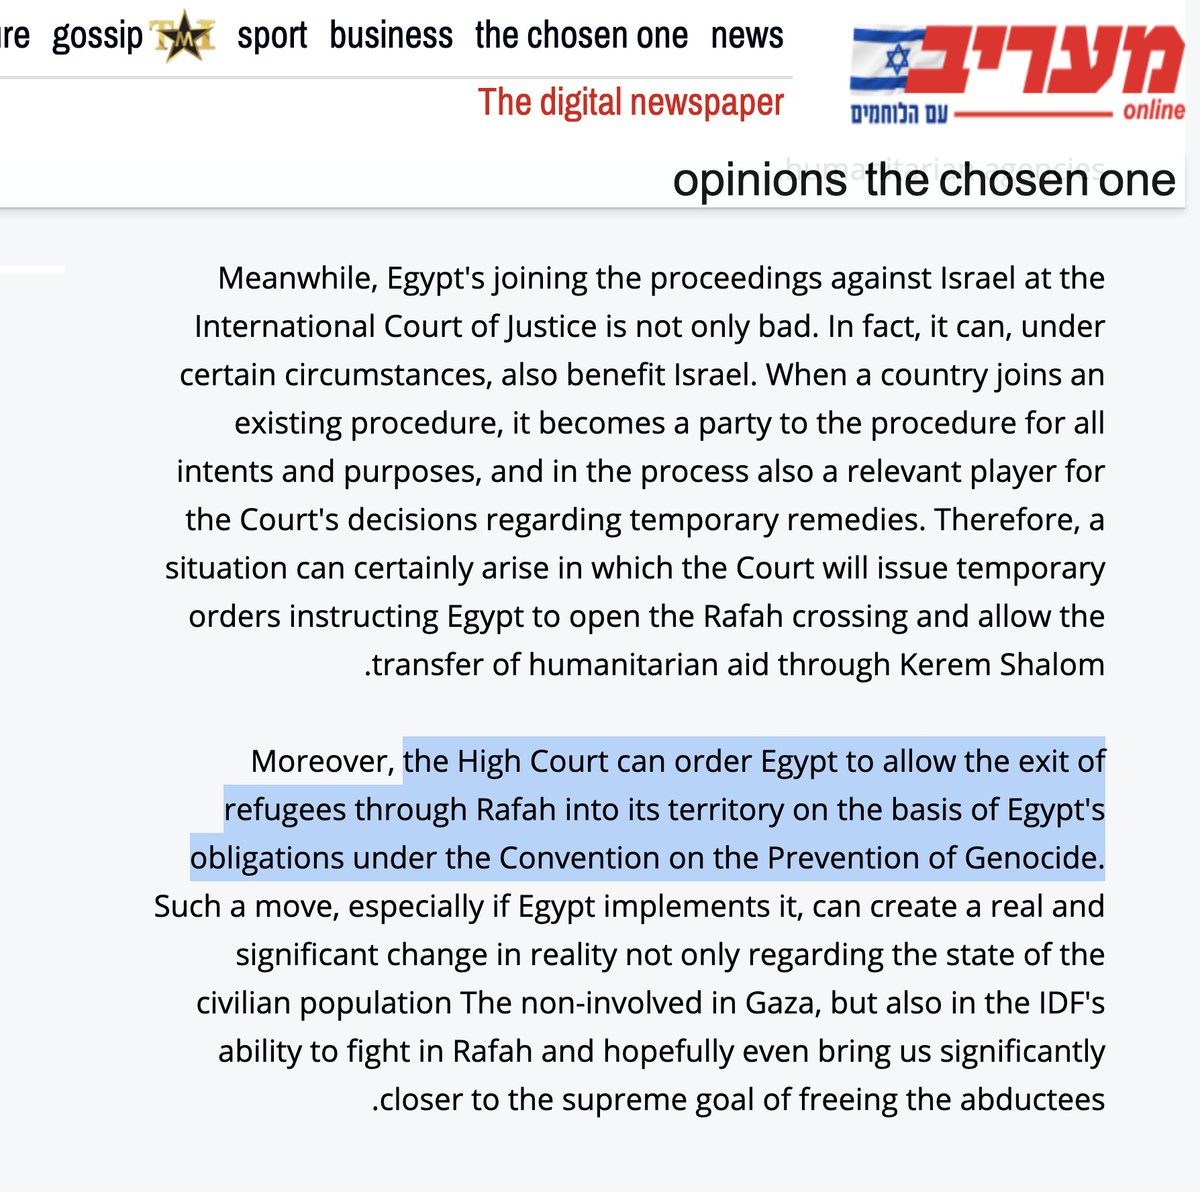 Israel is optimistic that Egypt joining South Africa's bid at the International Court of Justice can be exploited to force Egypt to take in Gazan refugees en masse. In that line of argument, Israel's prominent Maariv newspaper admits a genocide is being unleashed on Gaza!